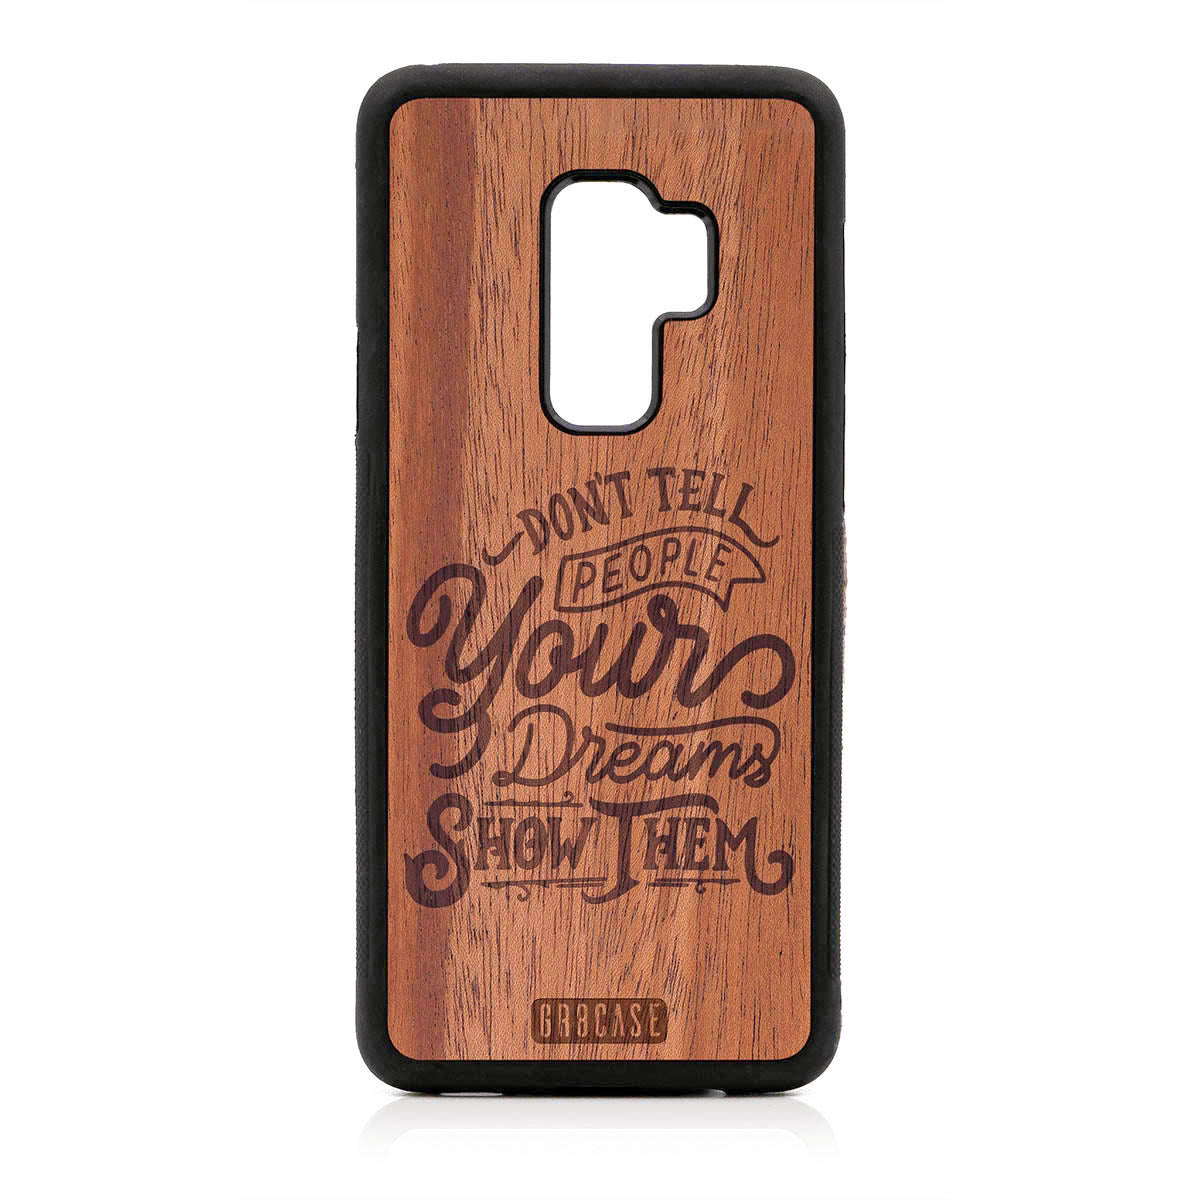 Don't Tell People Your Dreams Show Them Design Wood Case For Samsung Galaxy S9 Plus by GR8CASE